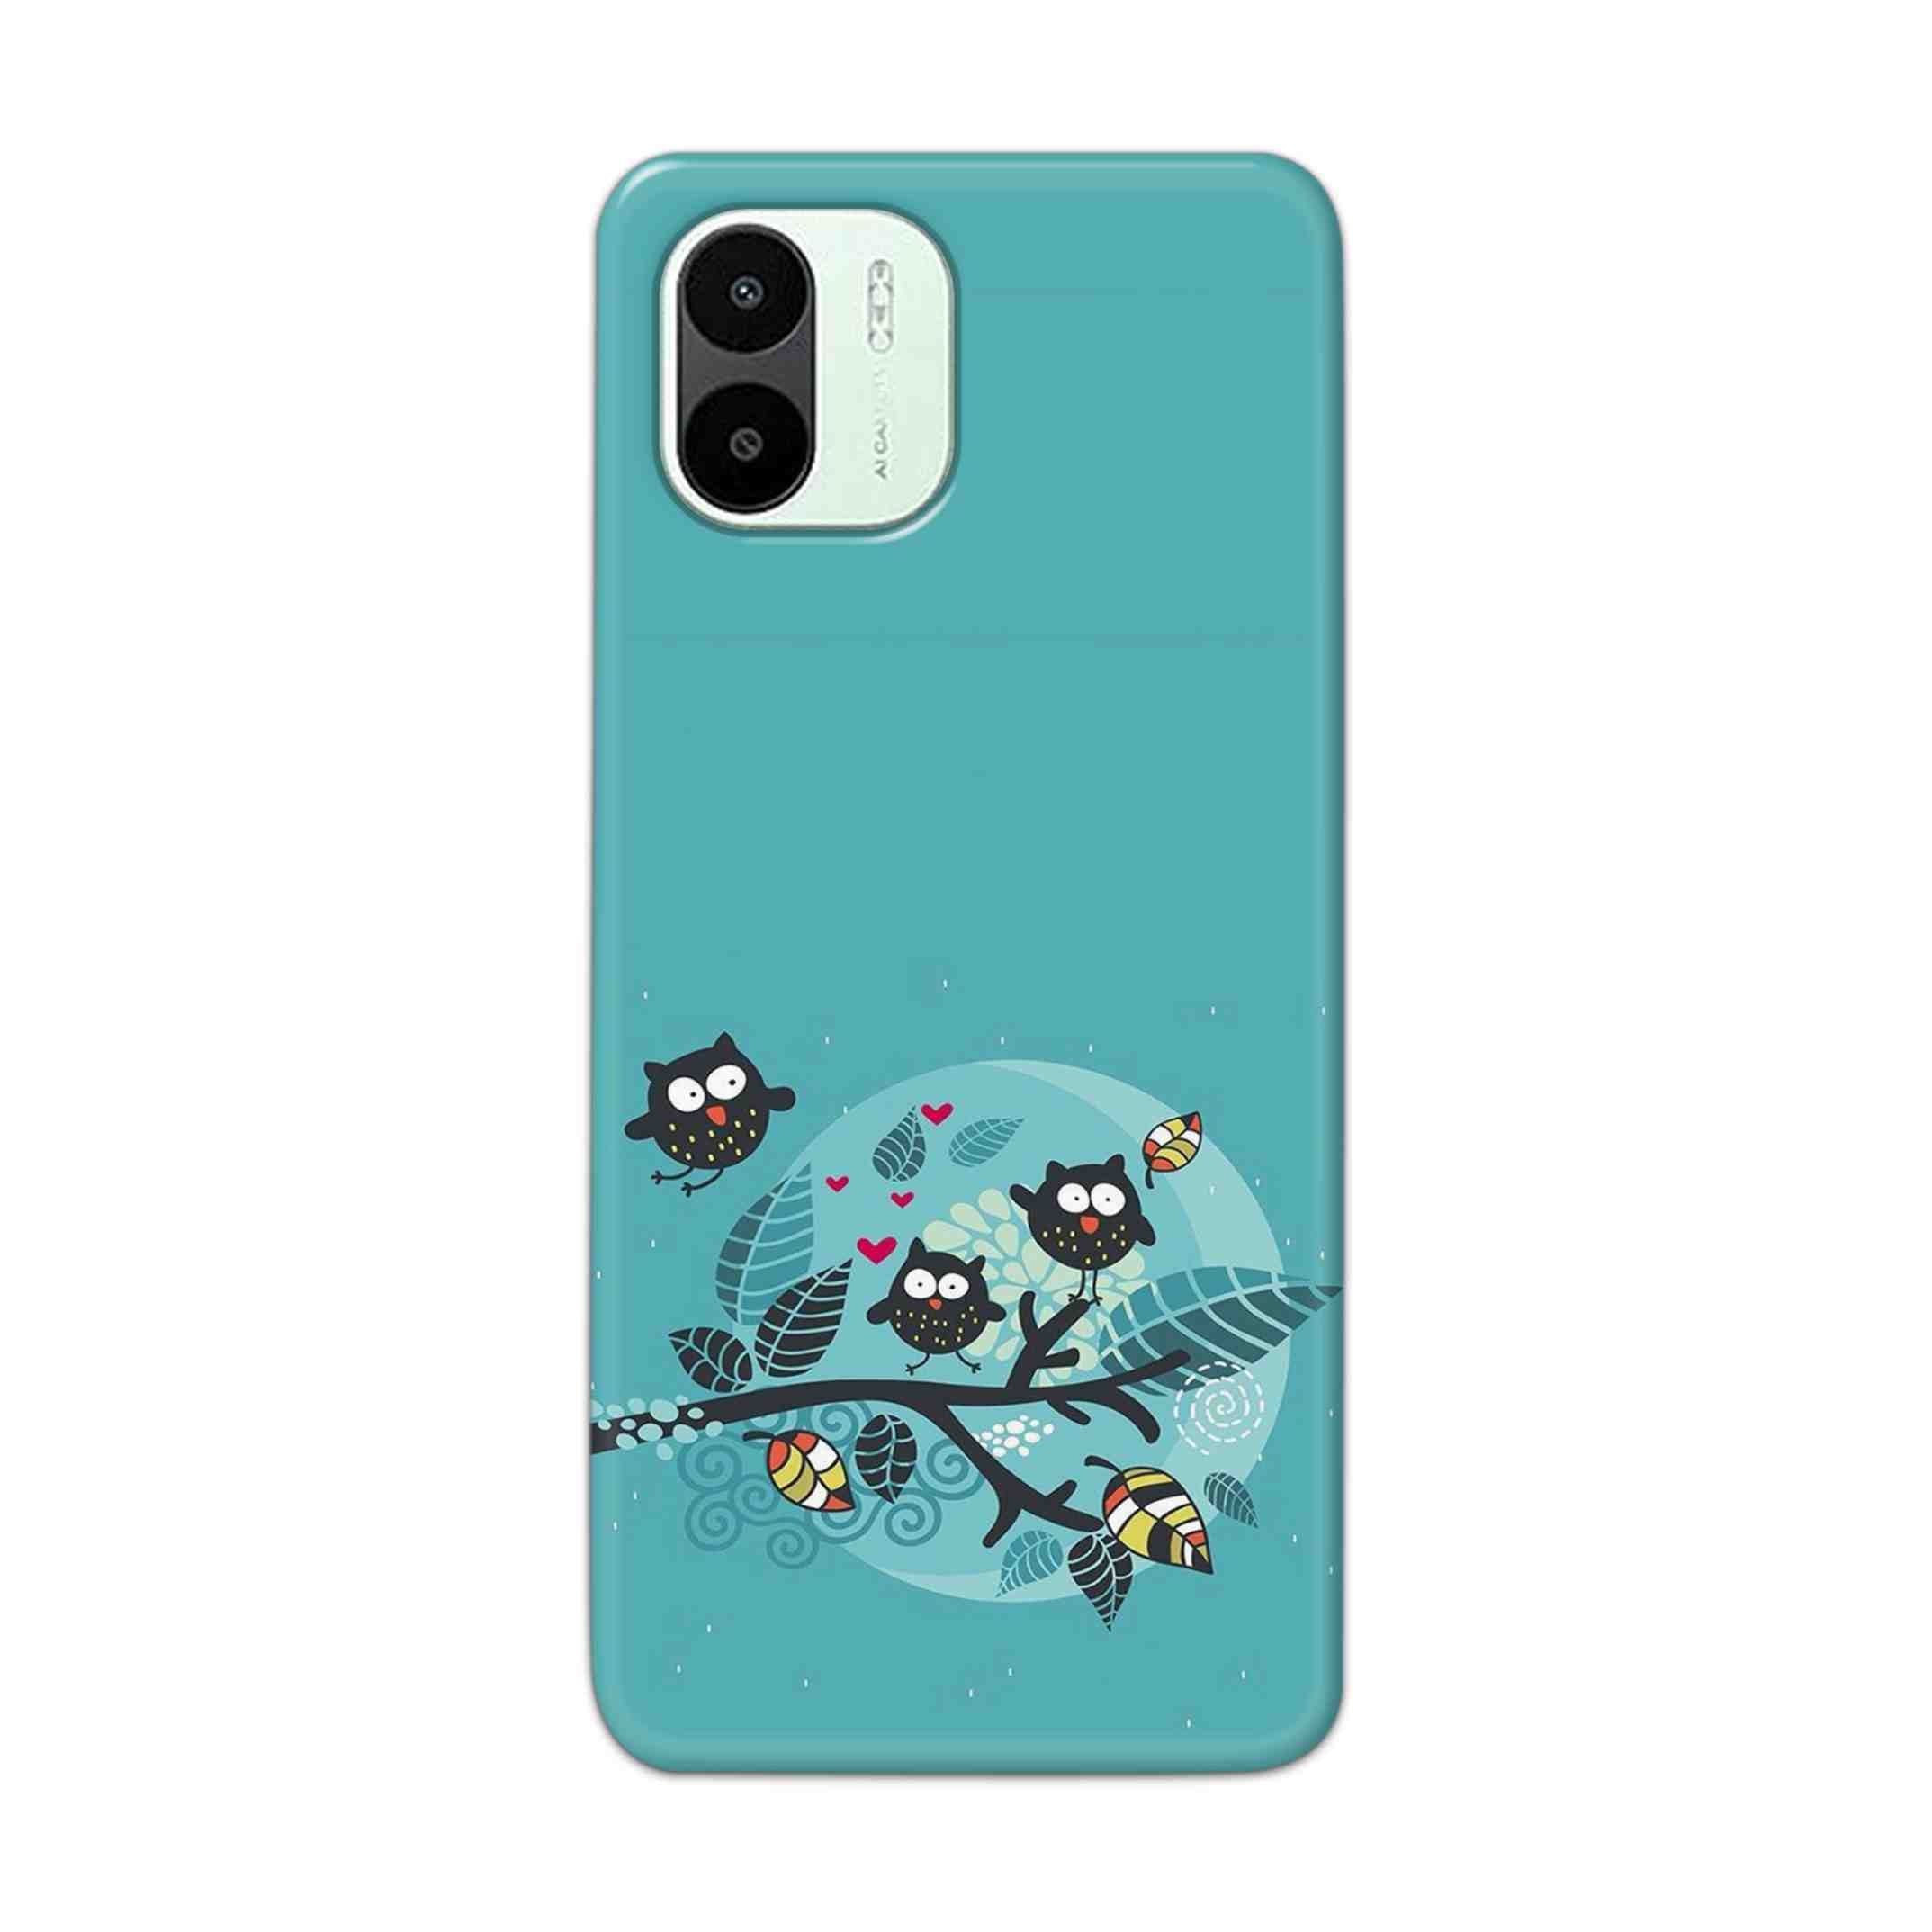 Buy Owl Hard Back Mobile Phone Case Cover For Xiaomi Redmi A1 5G Online